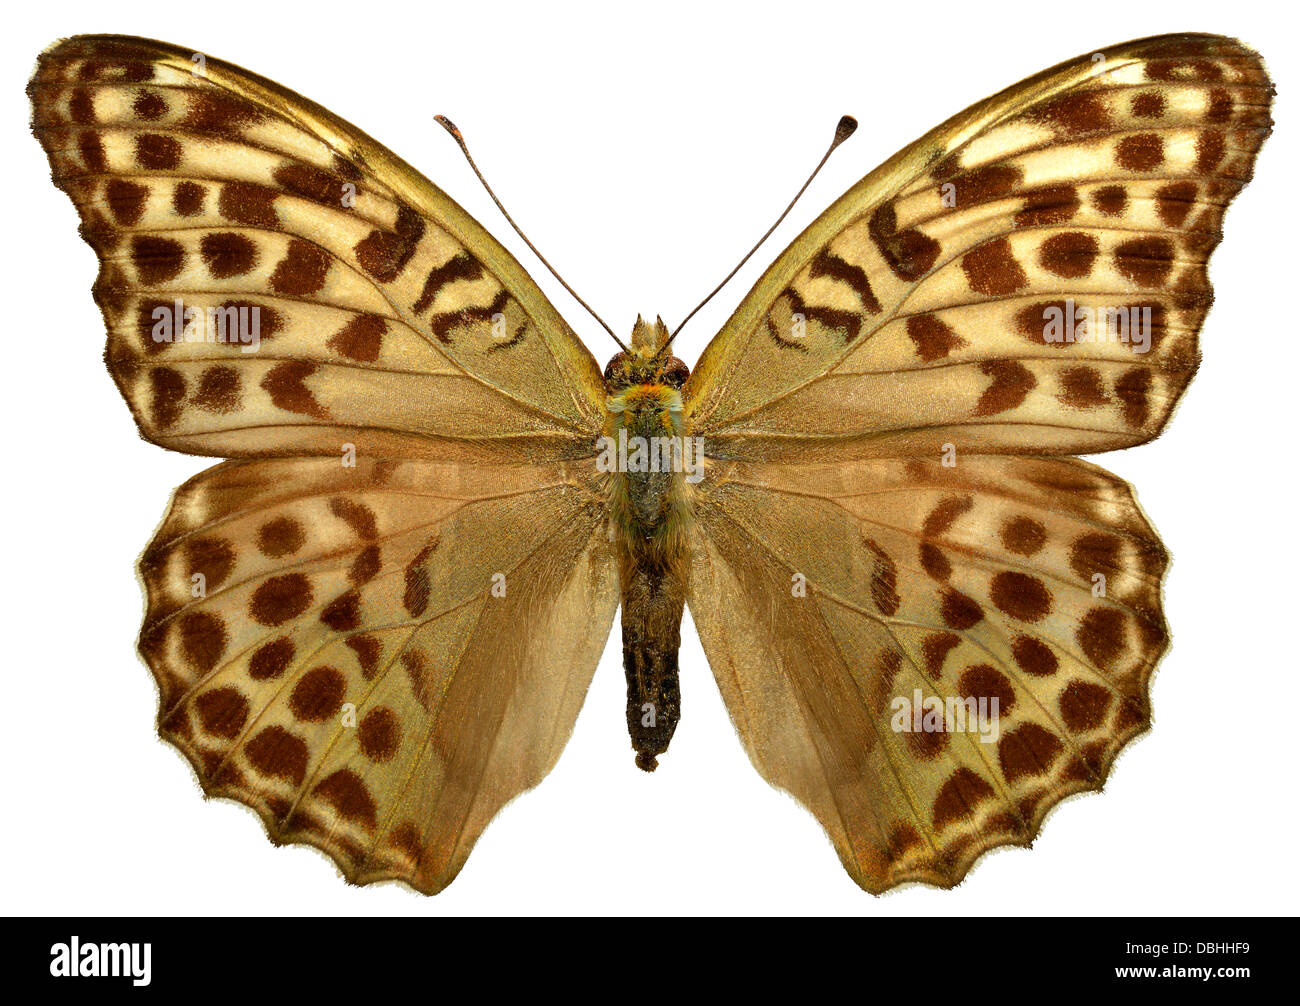 Female Silver-washed Fritillary butterfly (Argynnis paphia) isolated on white background Stock Photo